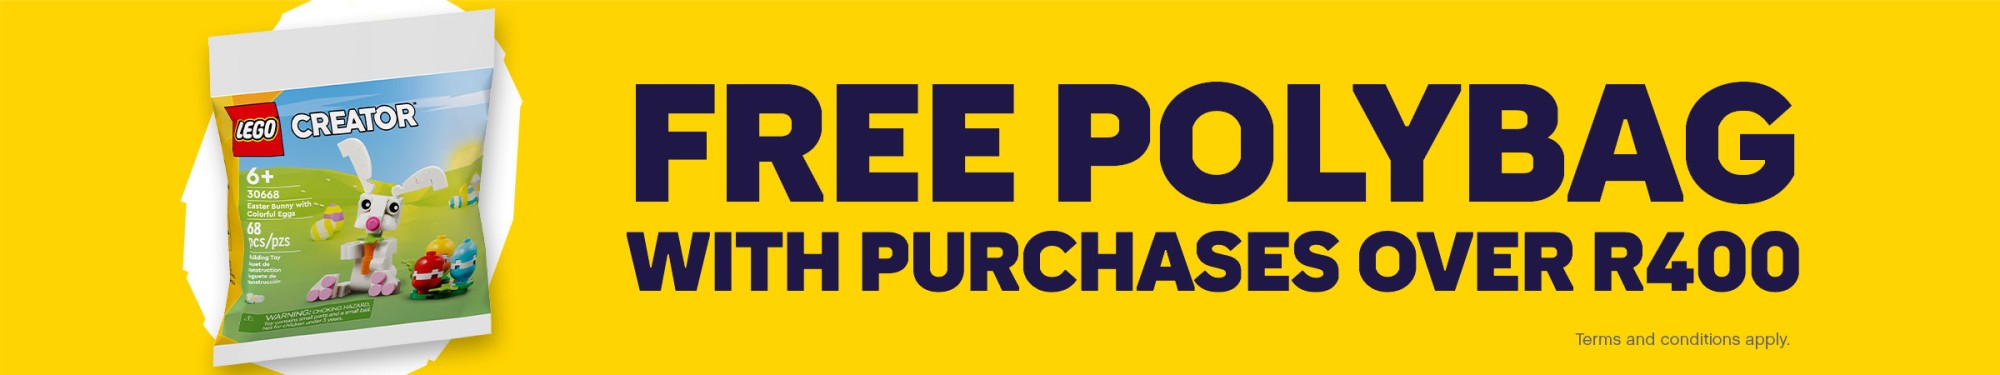 Free polybag with purchases over R400